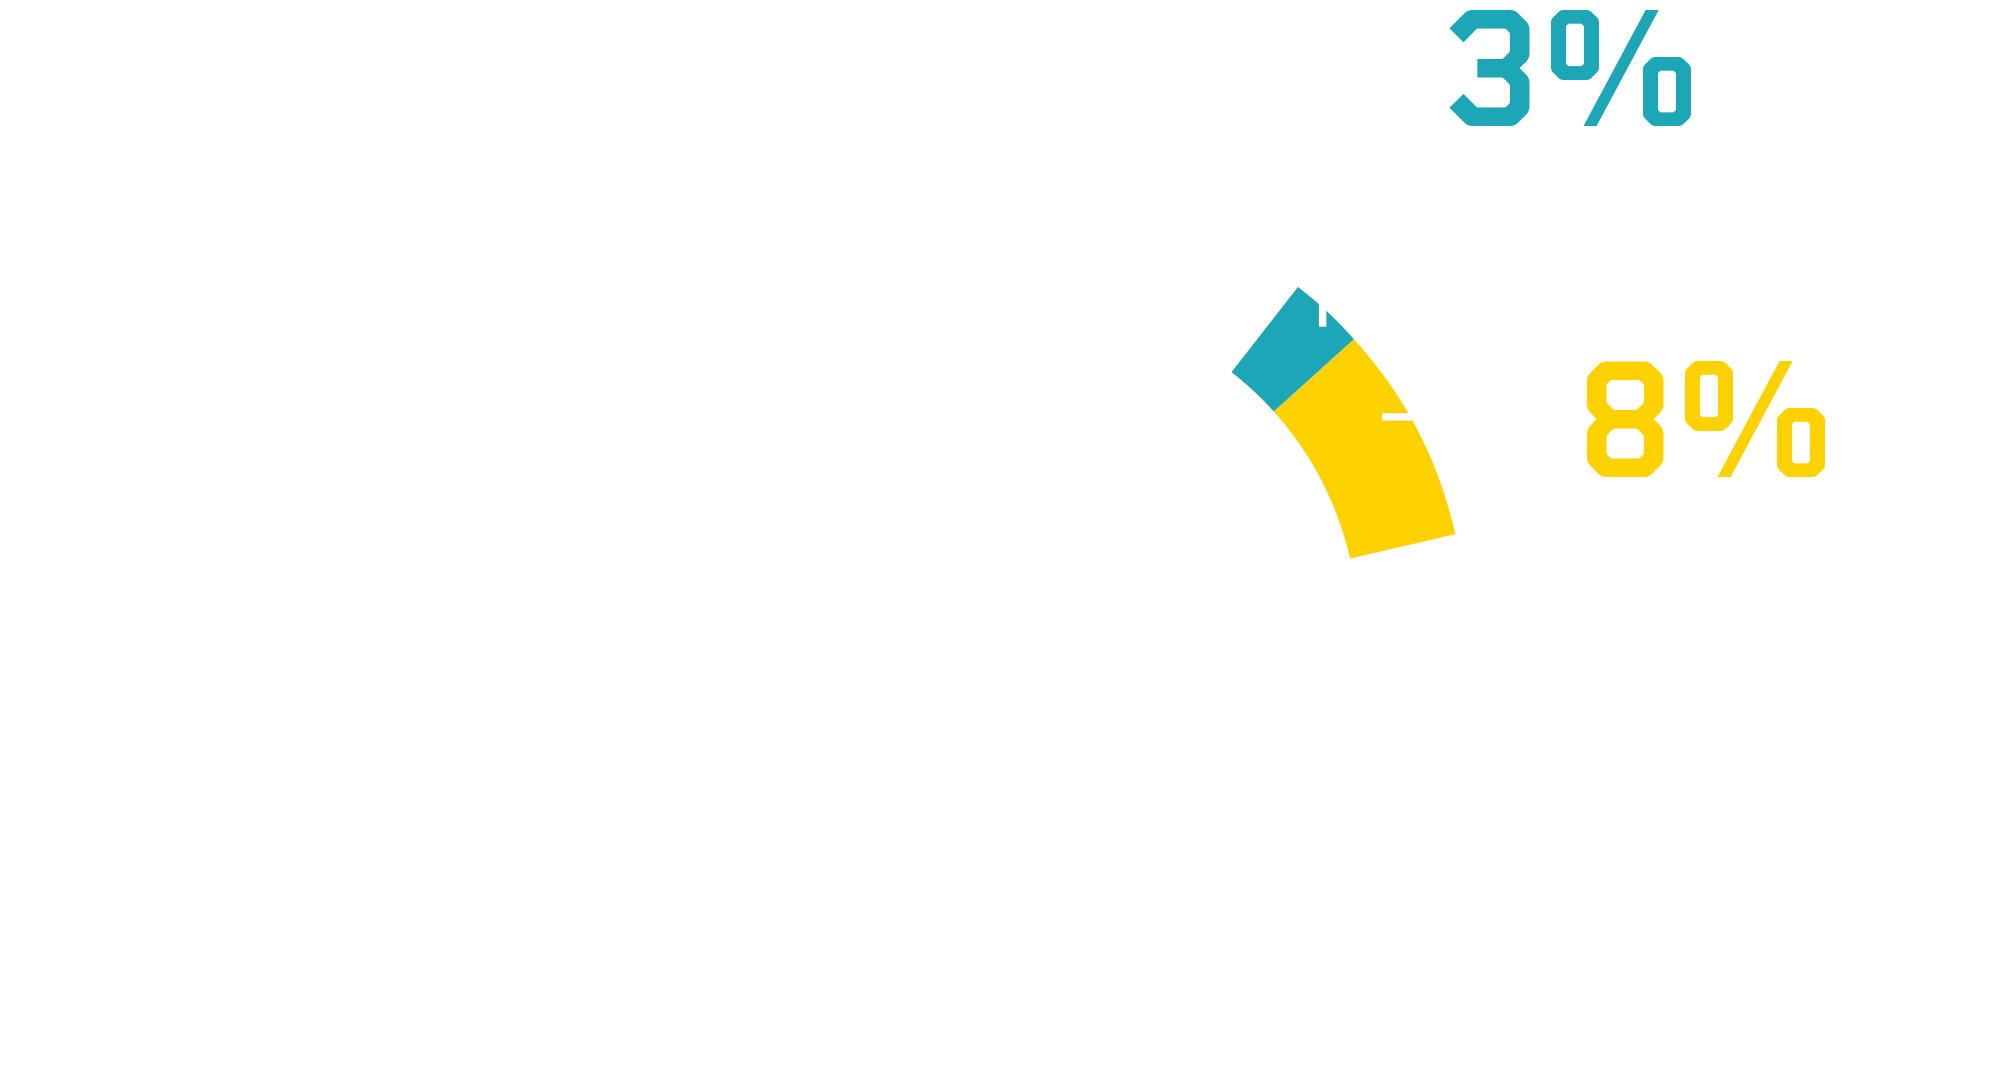 Vector illustration of a donut style statistical chart diagram consisted of donations - "89 percent programs" (white portion), "3 percent general and administrative" (blue portion), and "8 percent fundraising and development" (yellow portion)